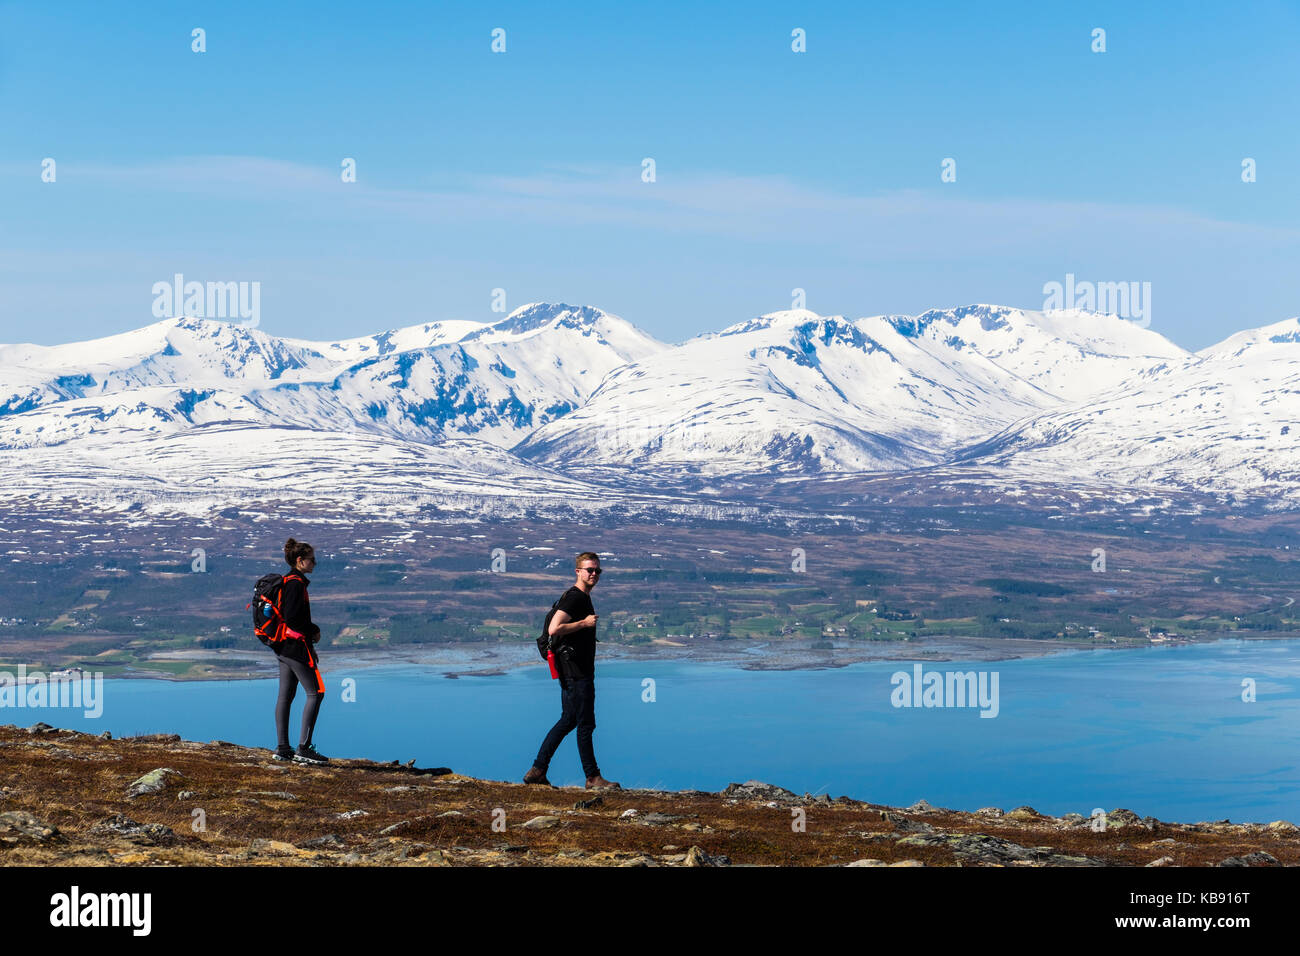 Hikers walking on Mount Storsteinen with backdrop of scenic snowcapped mountains in summer. Tromso, Troms, Norway, Scandinavia Stock Photo